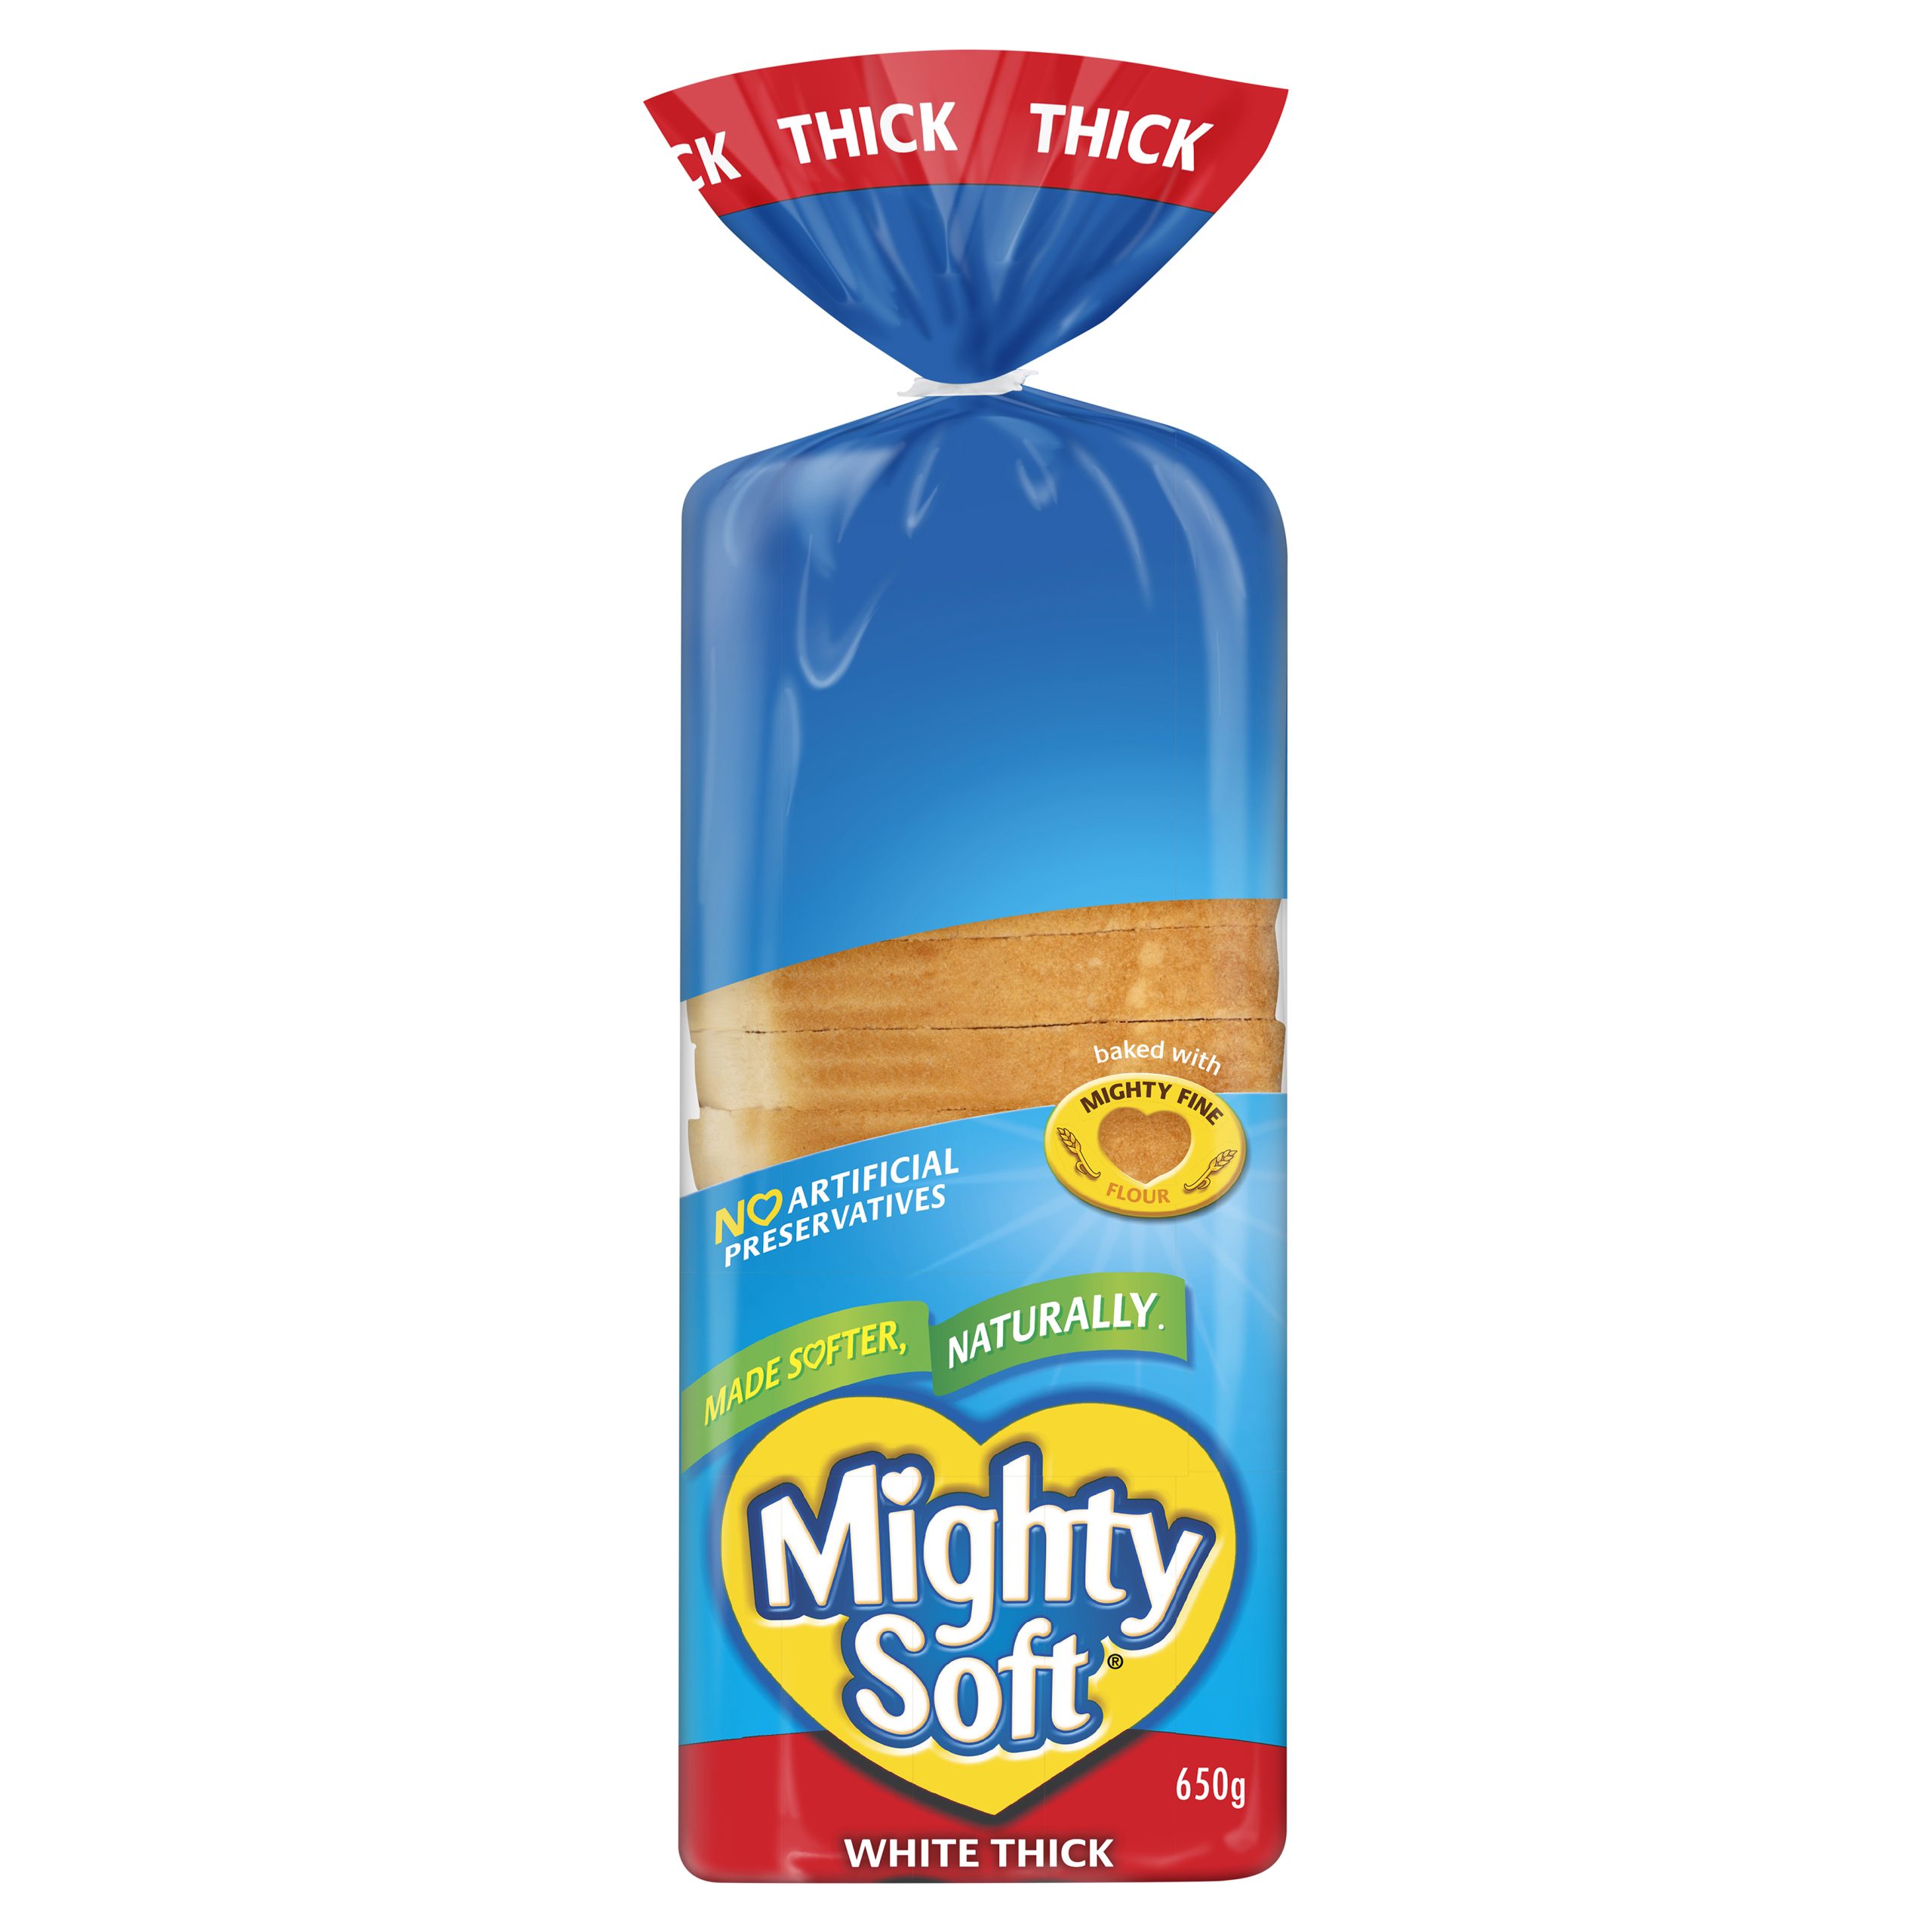 Mighty Soft Loaf White Thick 650 g product photo